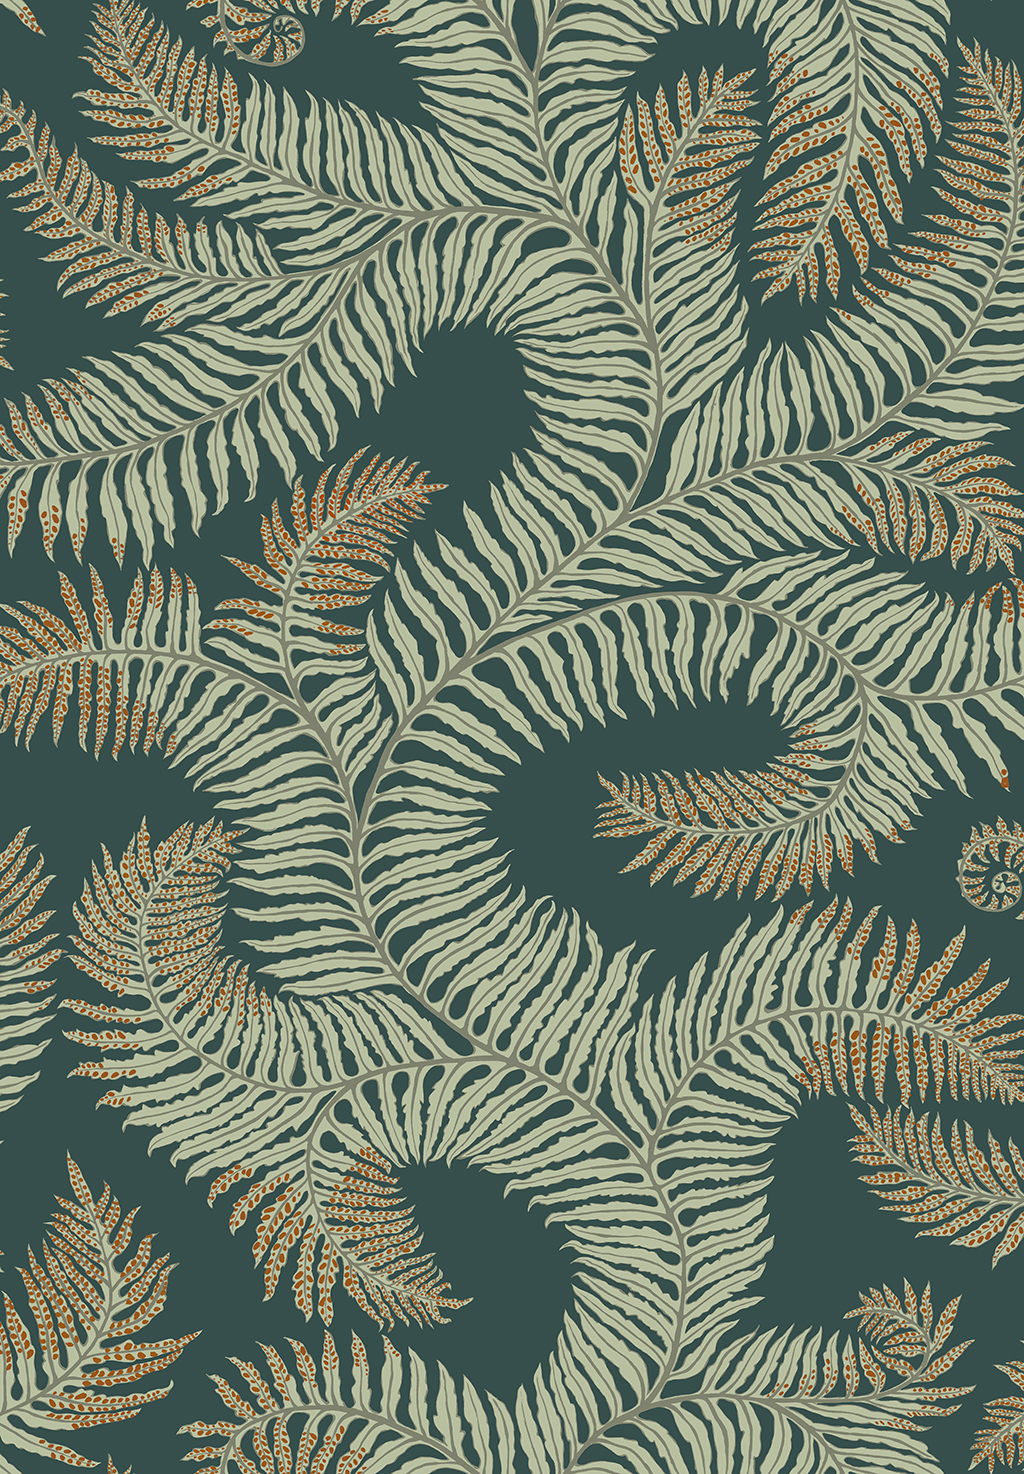 Bombes Fernery Wallpaper - Teal and Orange